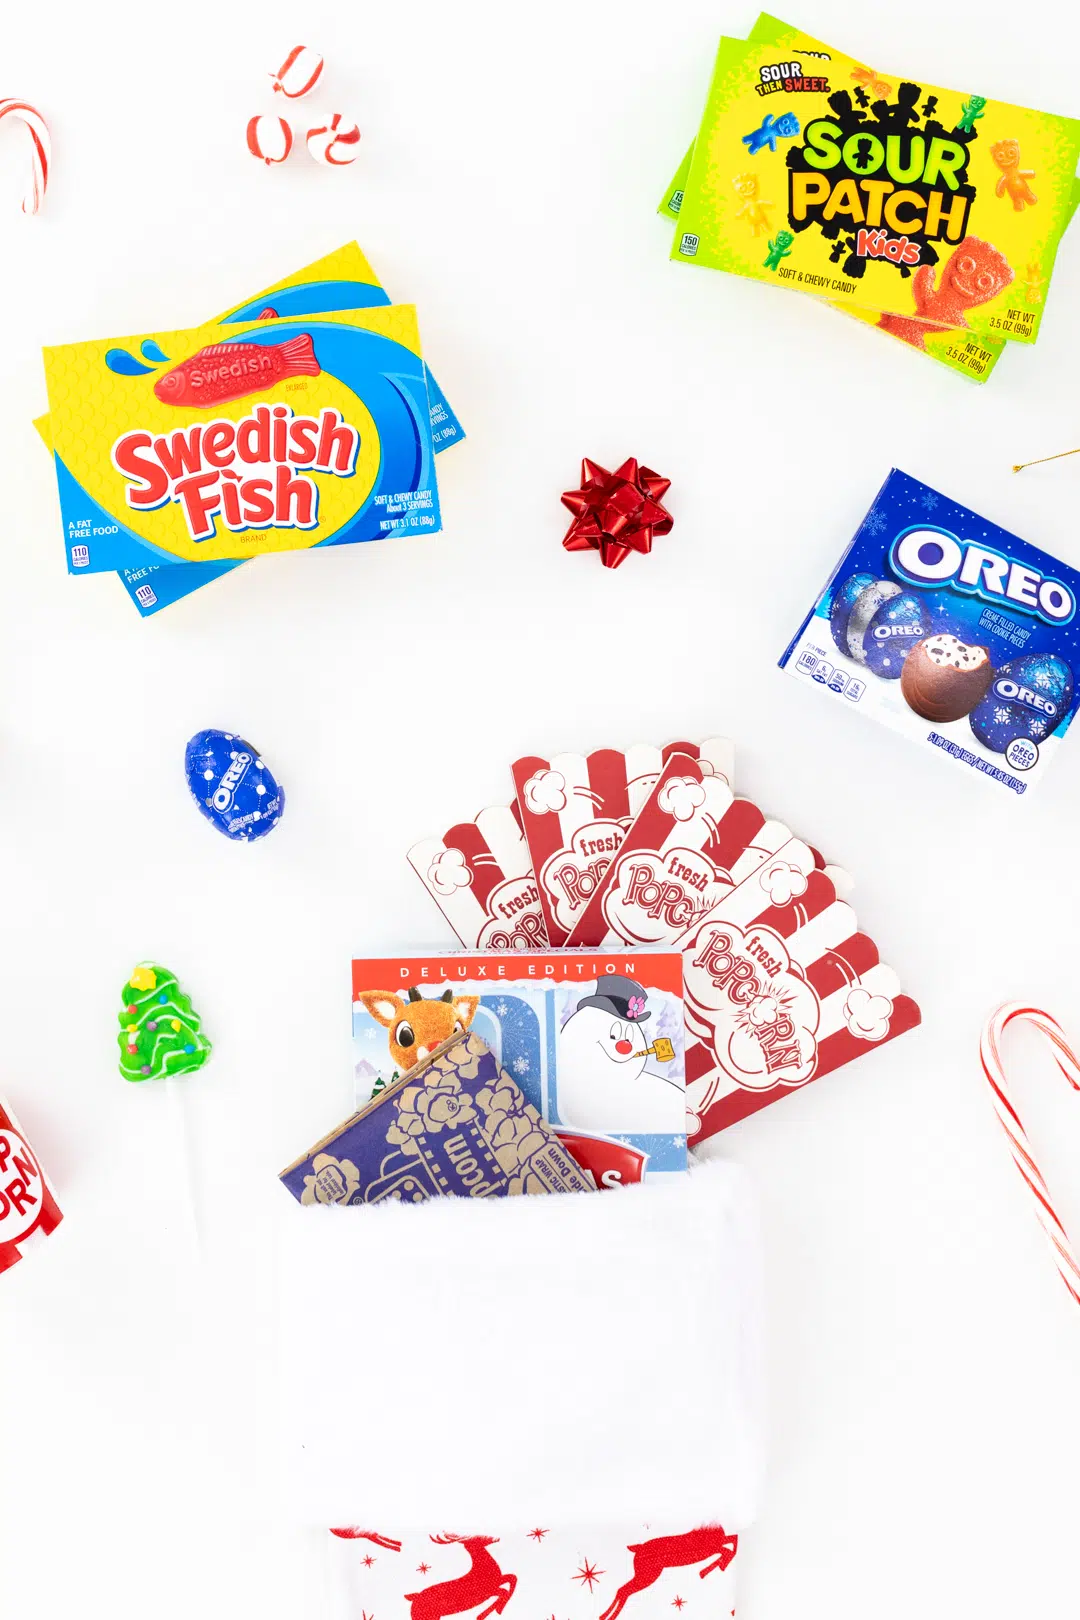 movie themed stocking with fillers like microwave popcorn, candy, popcorn ornament and more